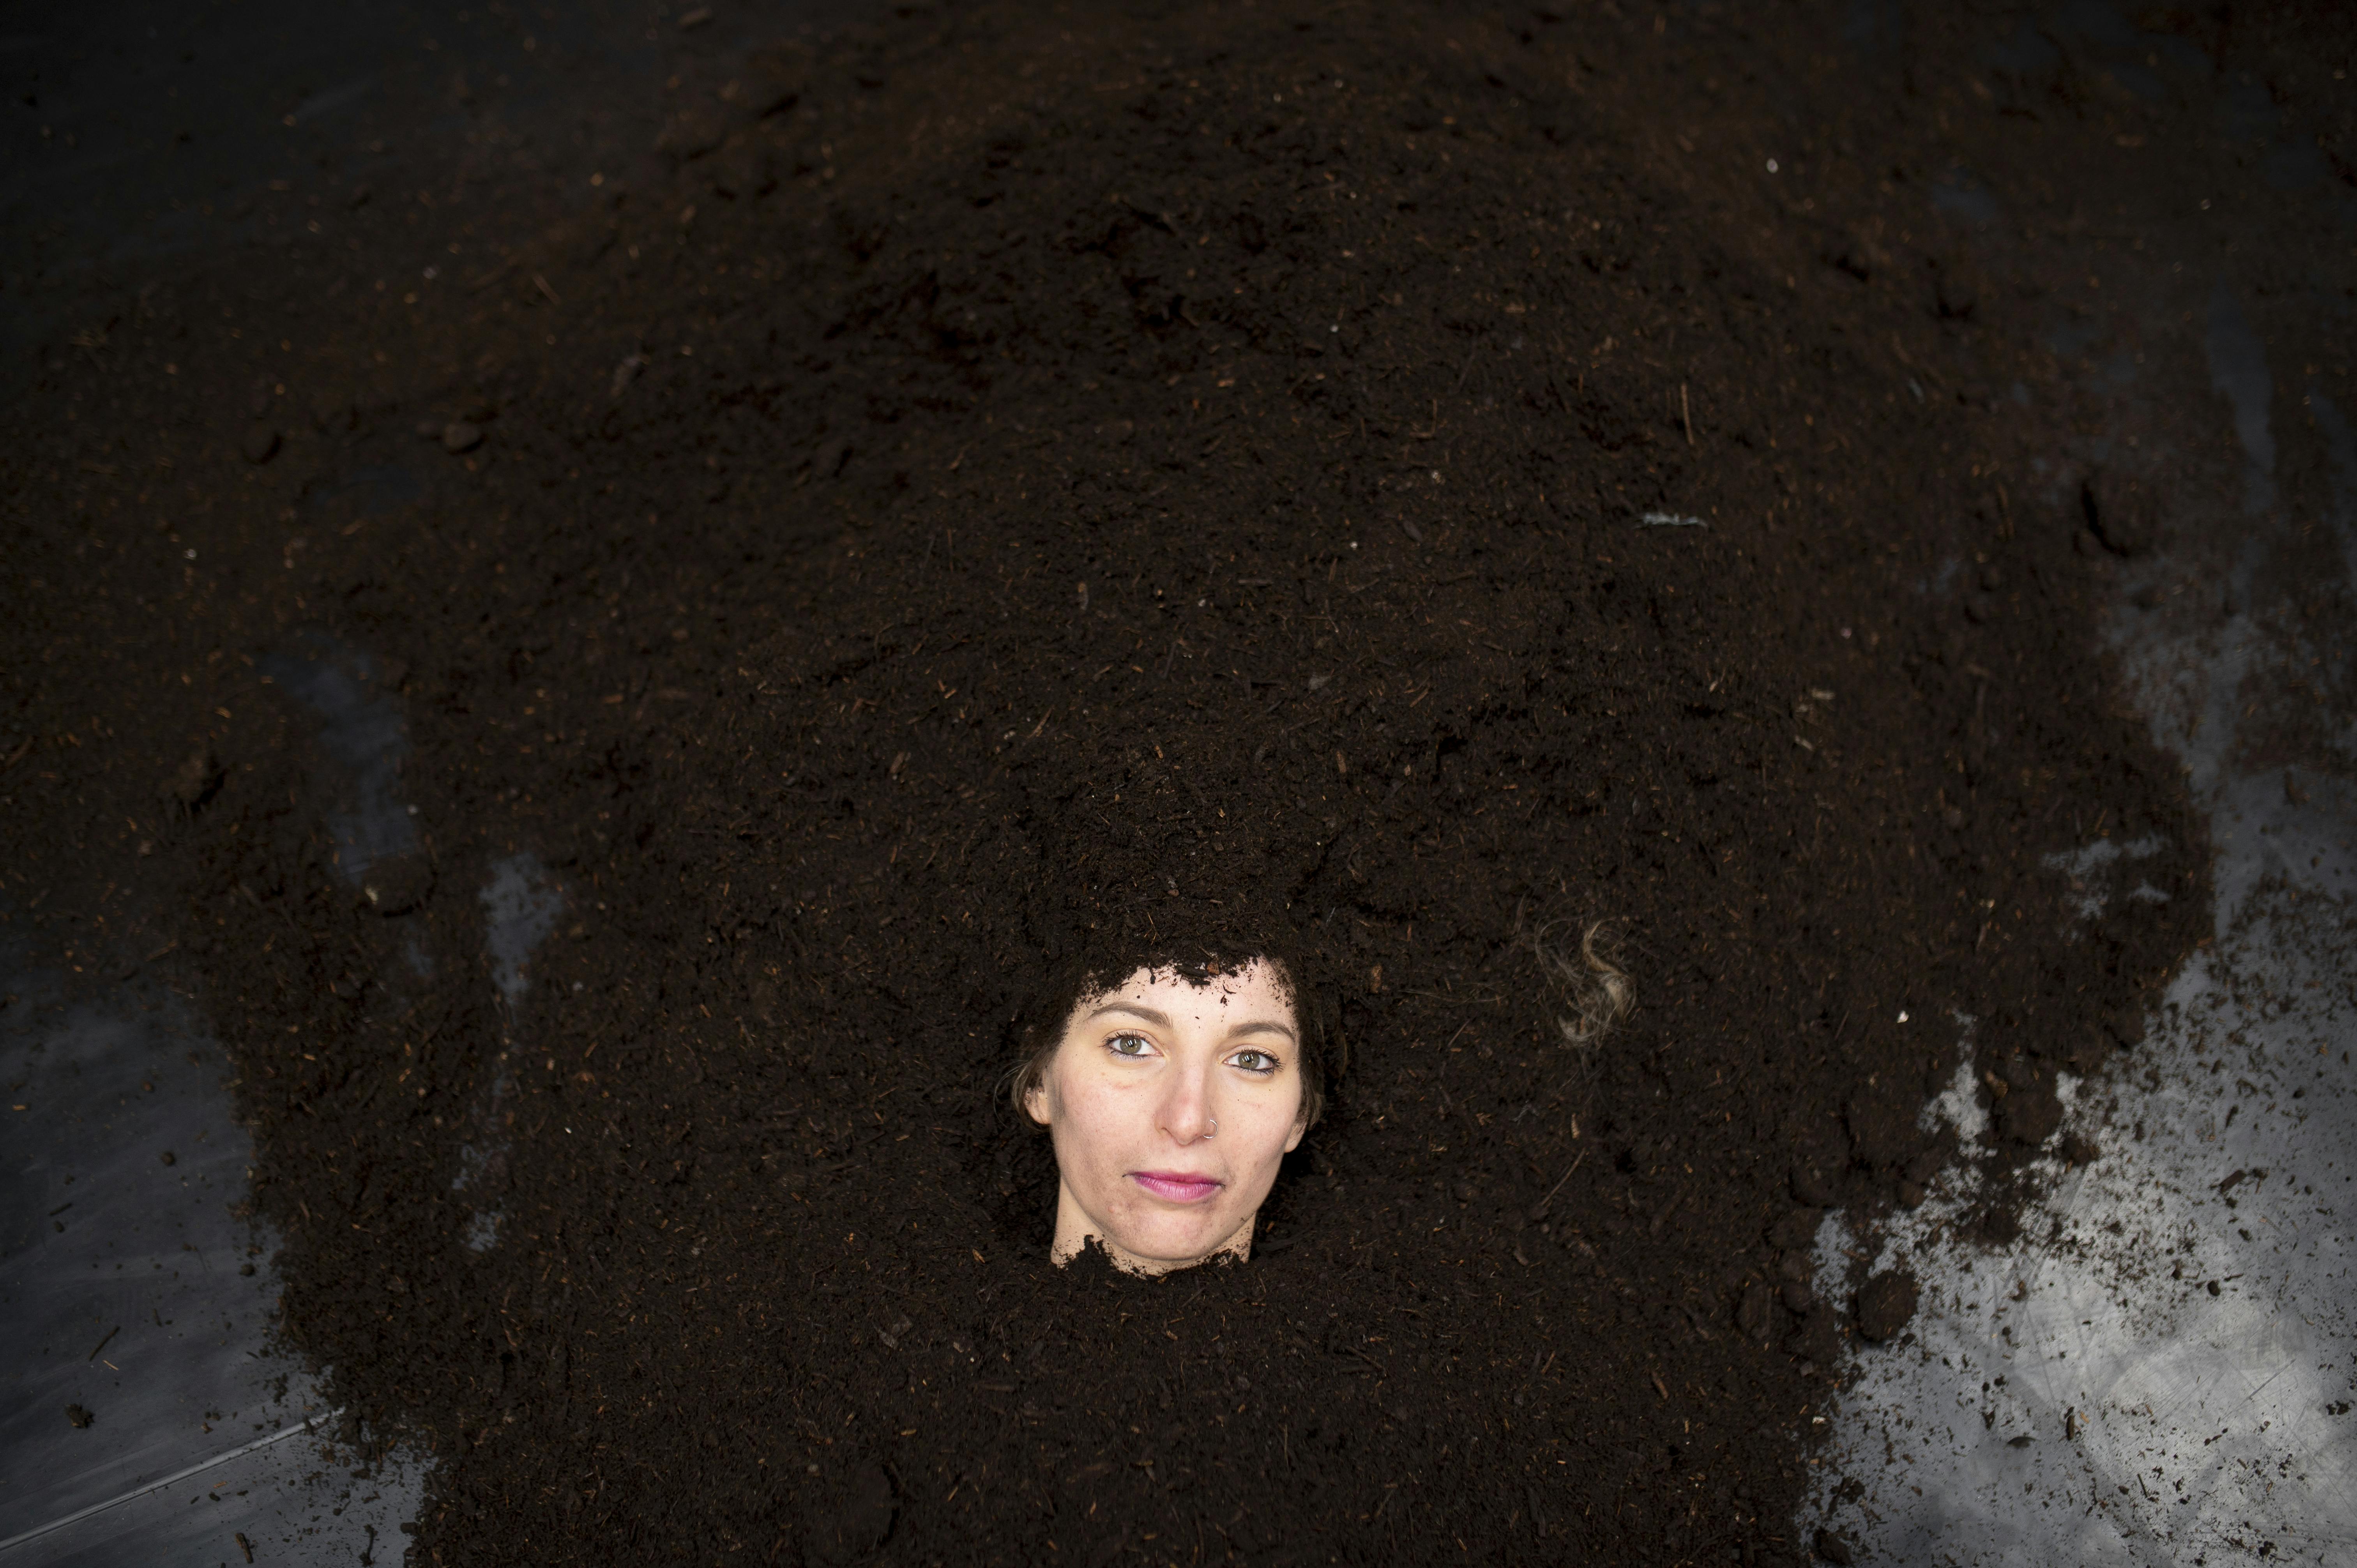 The face of the performer emerges from a pile of dirt spread on a dance mat